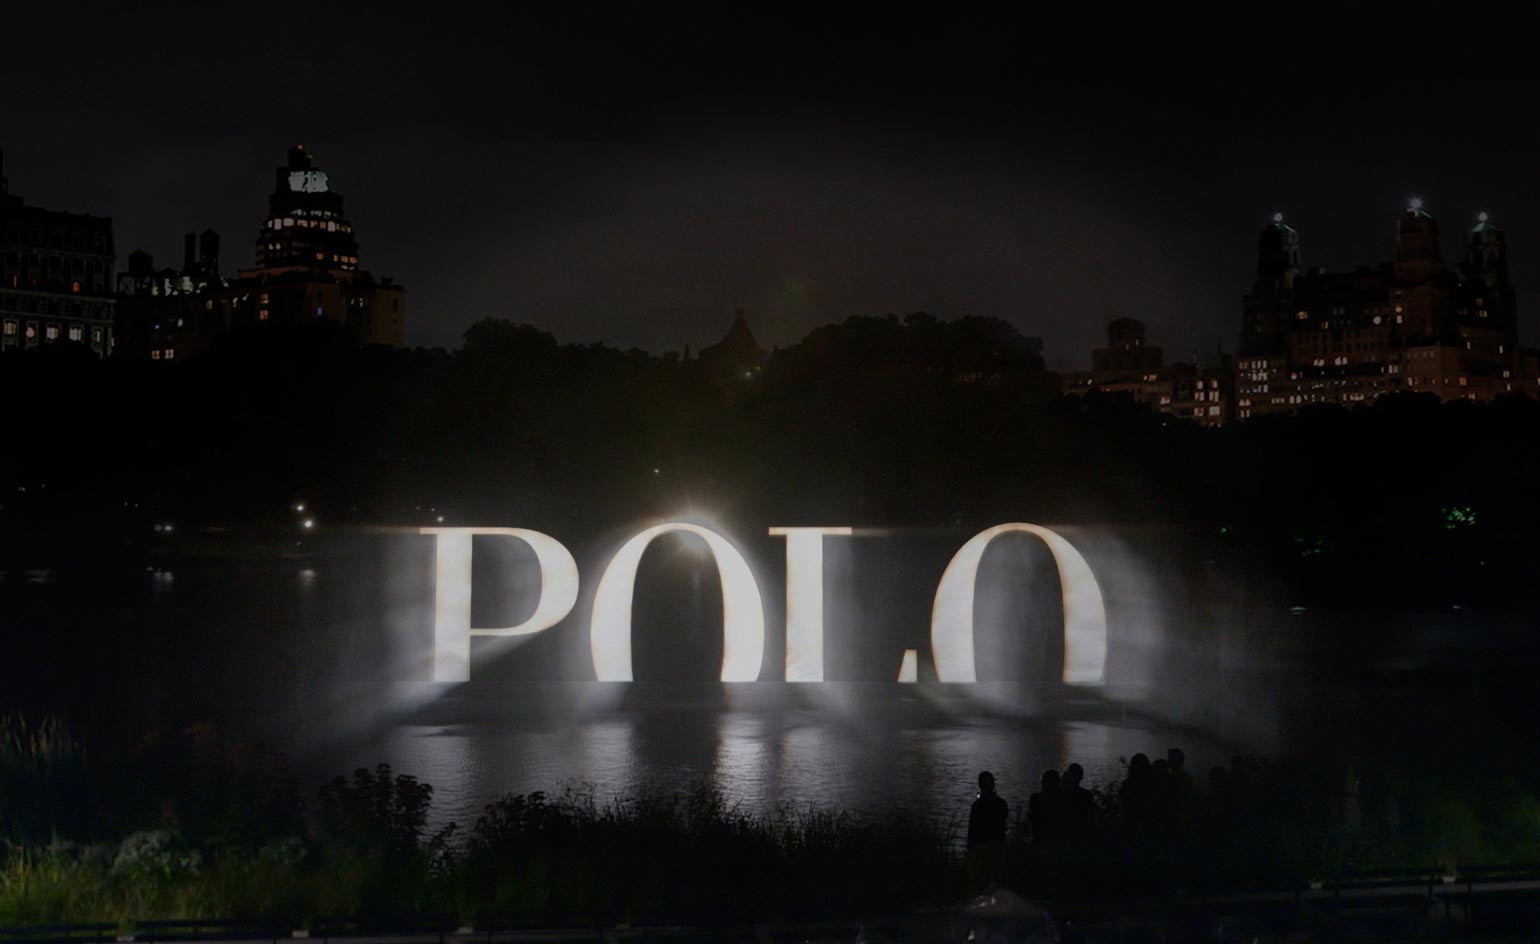 Ralph Lauren Polo S 4d Holographic Wall Of Water Lights Up Central